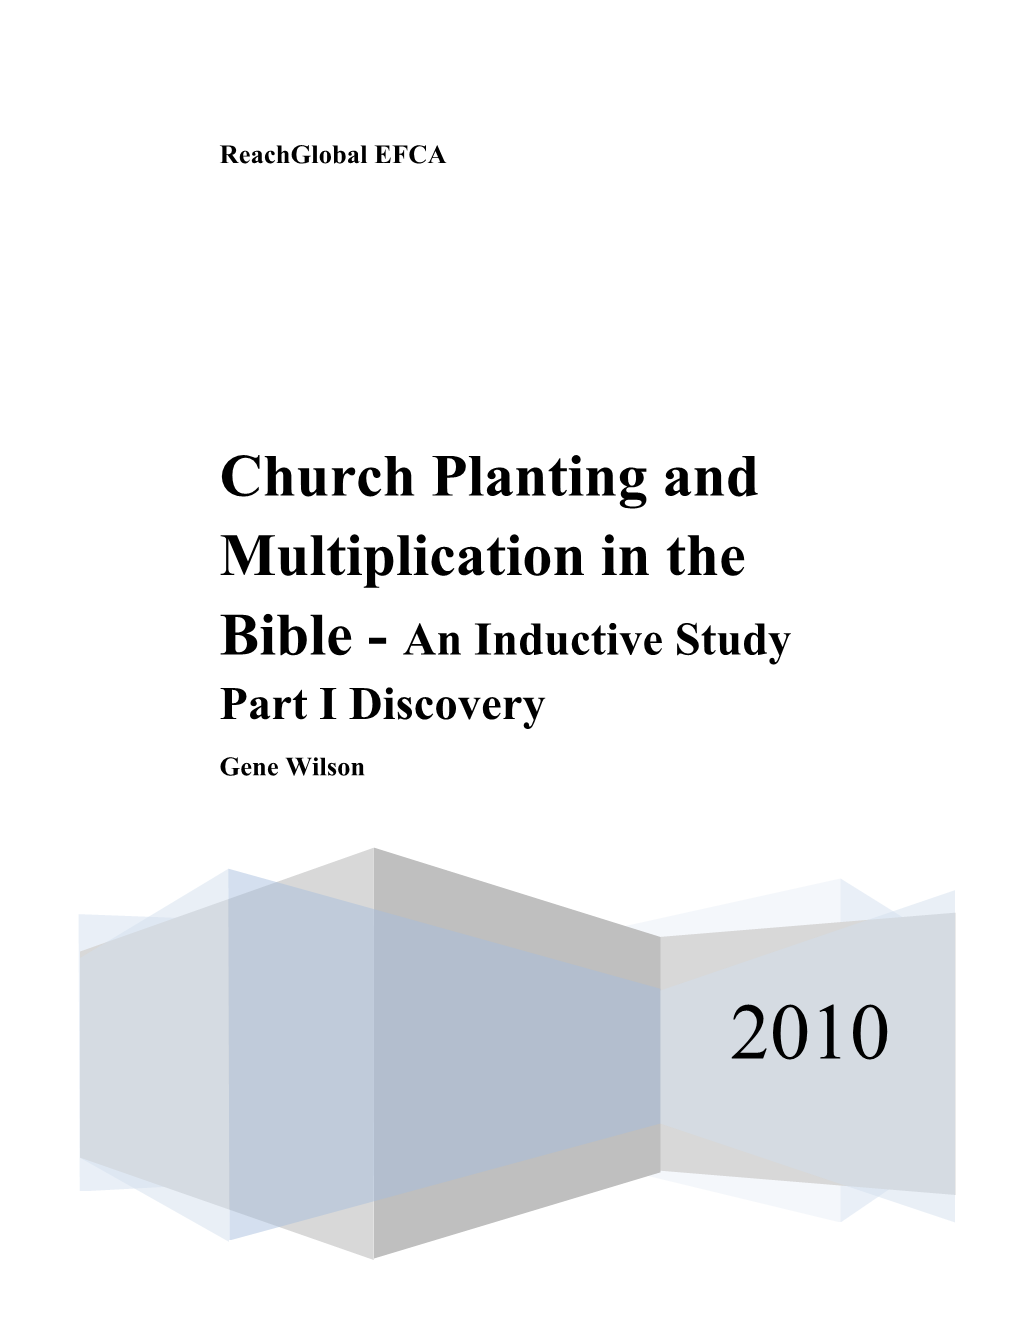 Church Planting and Multiplication in the Bible